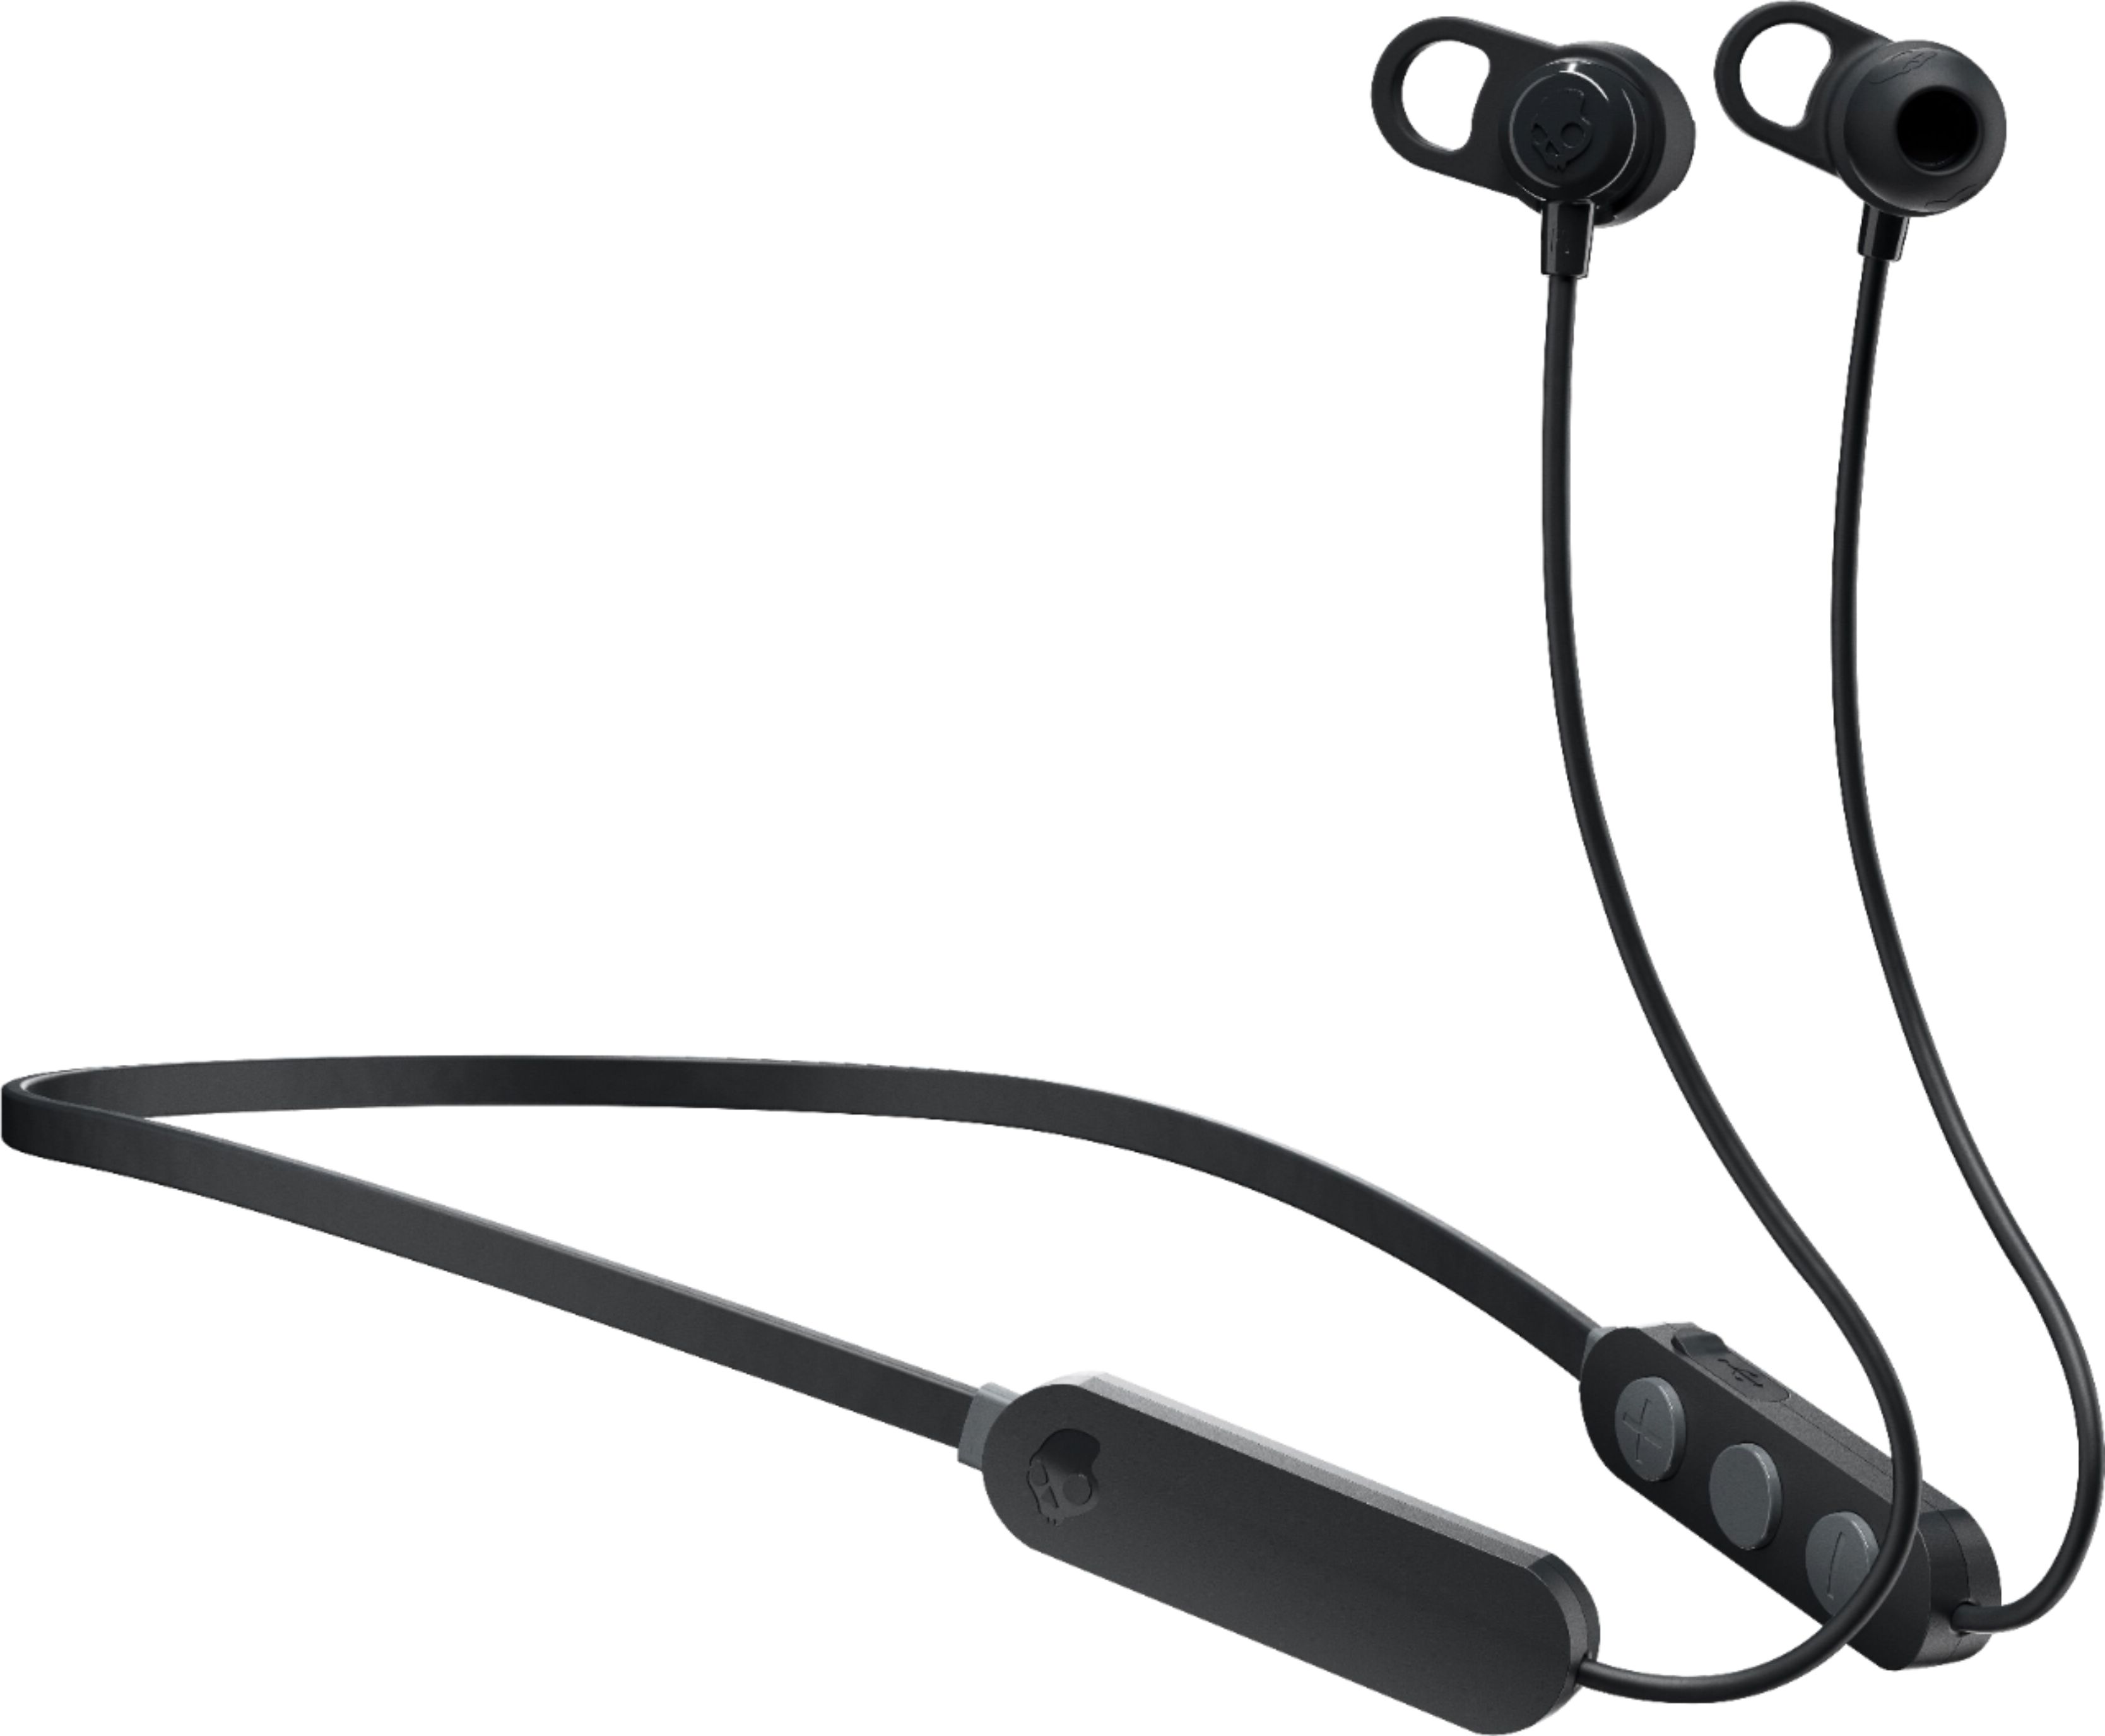 Questions and Answers: Skullcandy Jib+ Wireless In-Ear Headphones Black ...